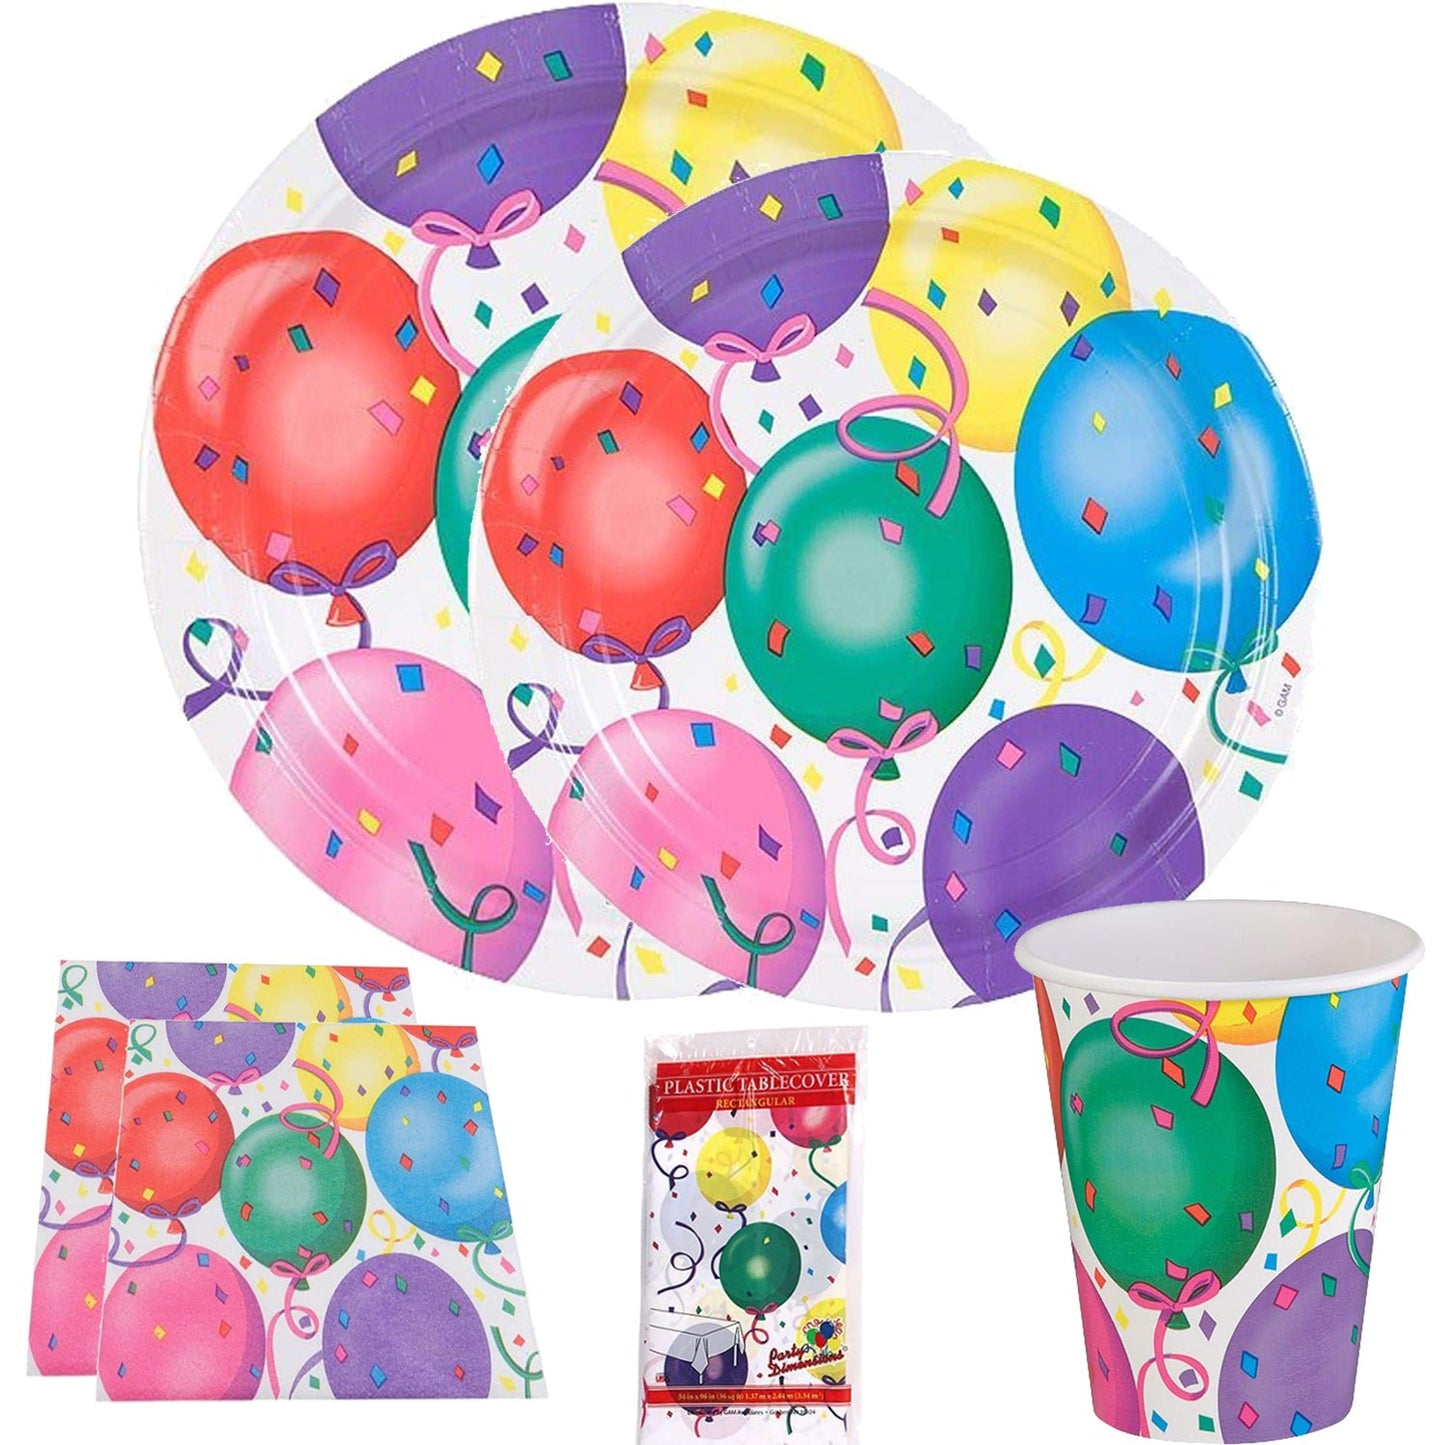 SALE Paper Cups Healy's Balloons Hot Cold 9 oz 12 count Paper Cups Hanna K   